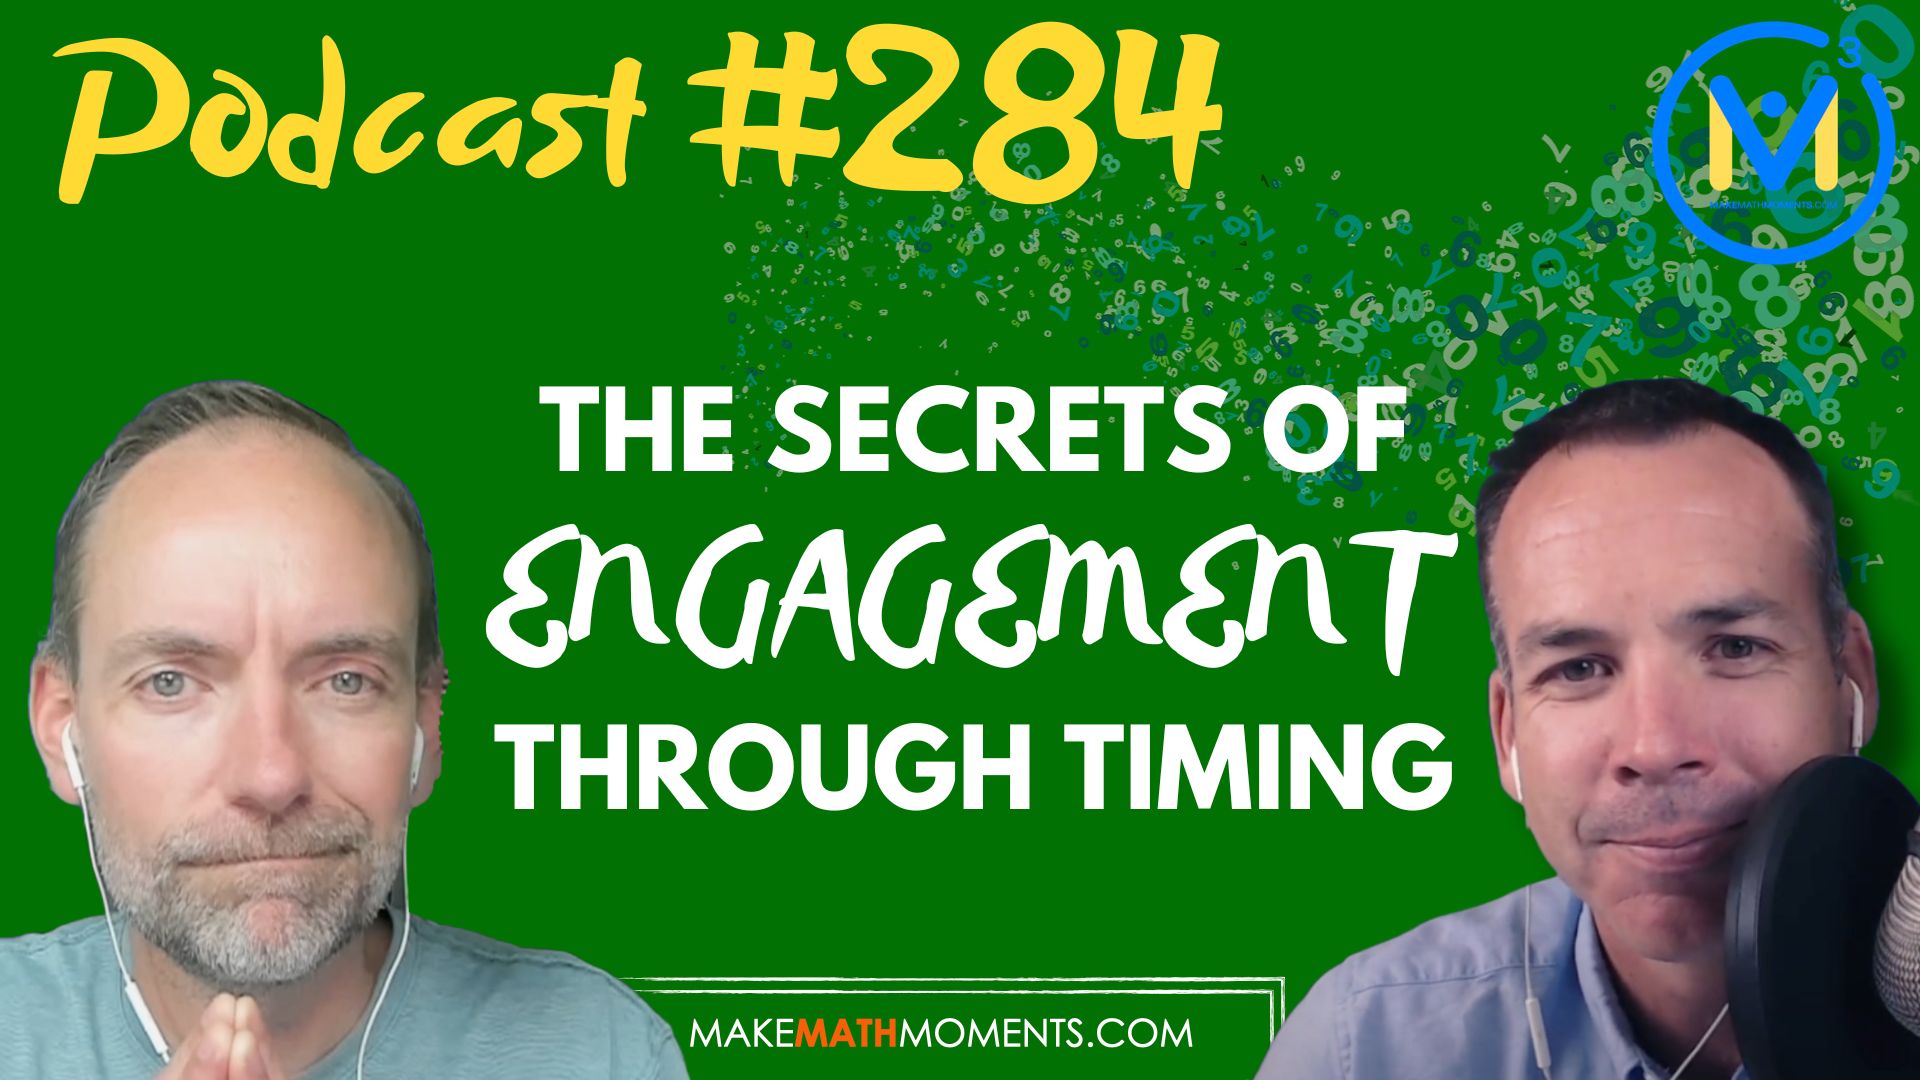 Episode #284: The Secrets of Engagement Through Timing – A Math Mentoring Moment